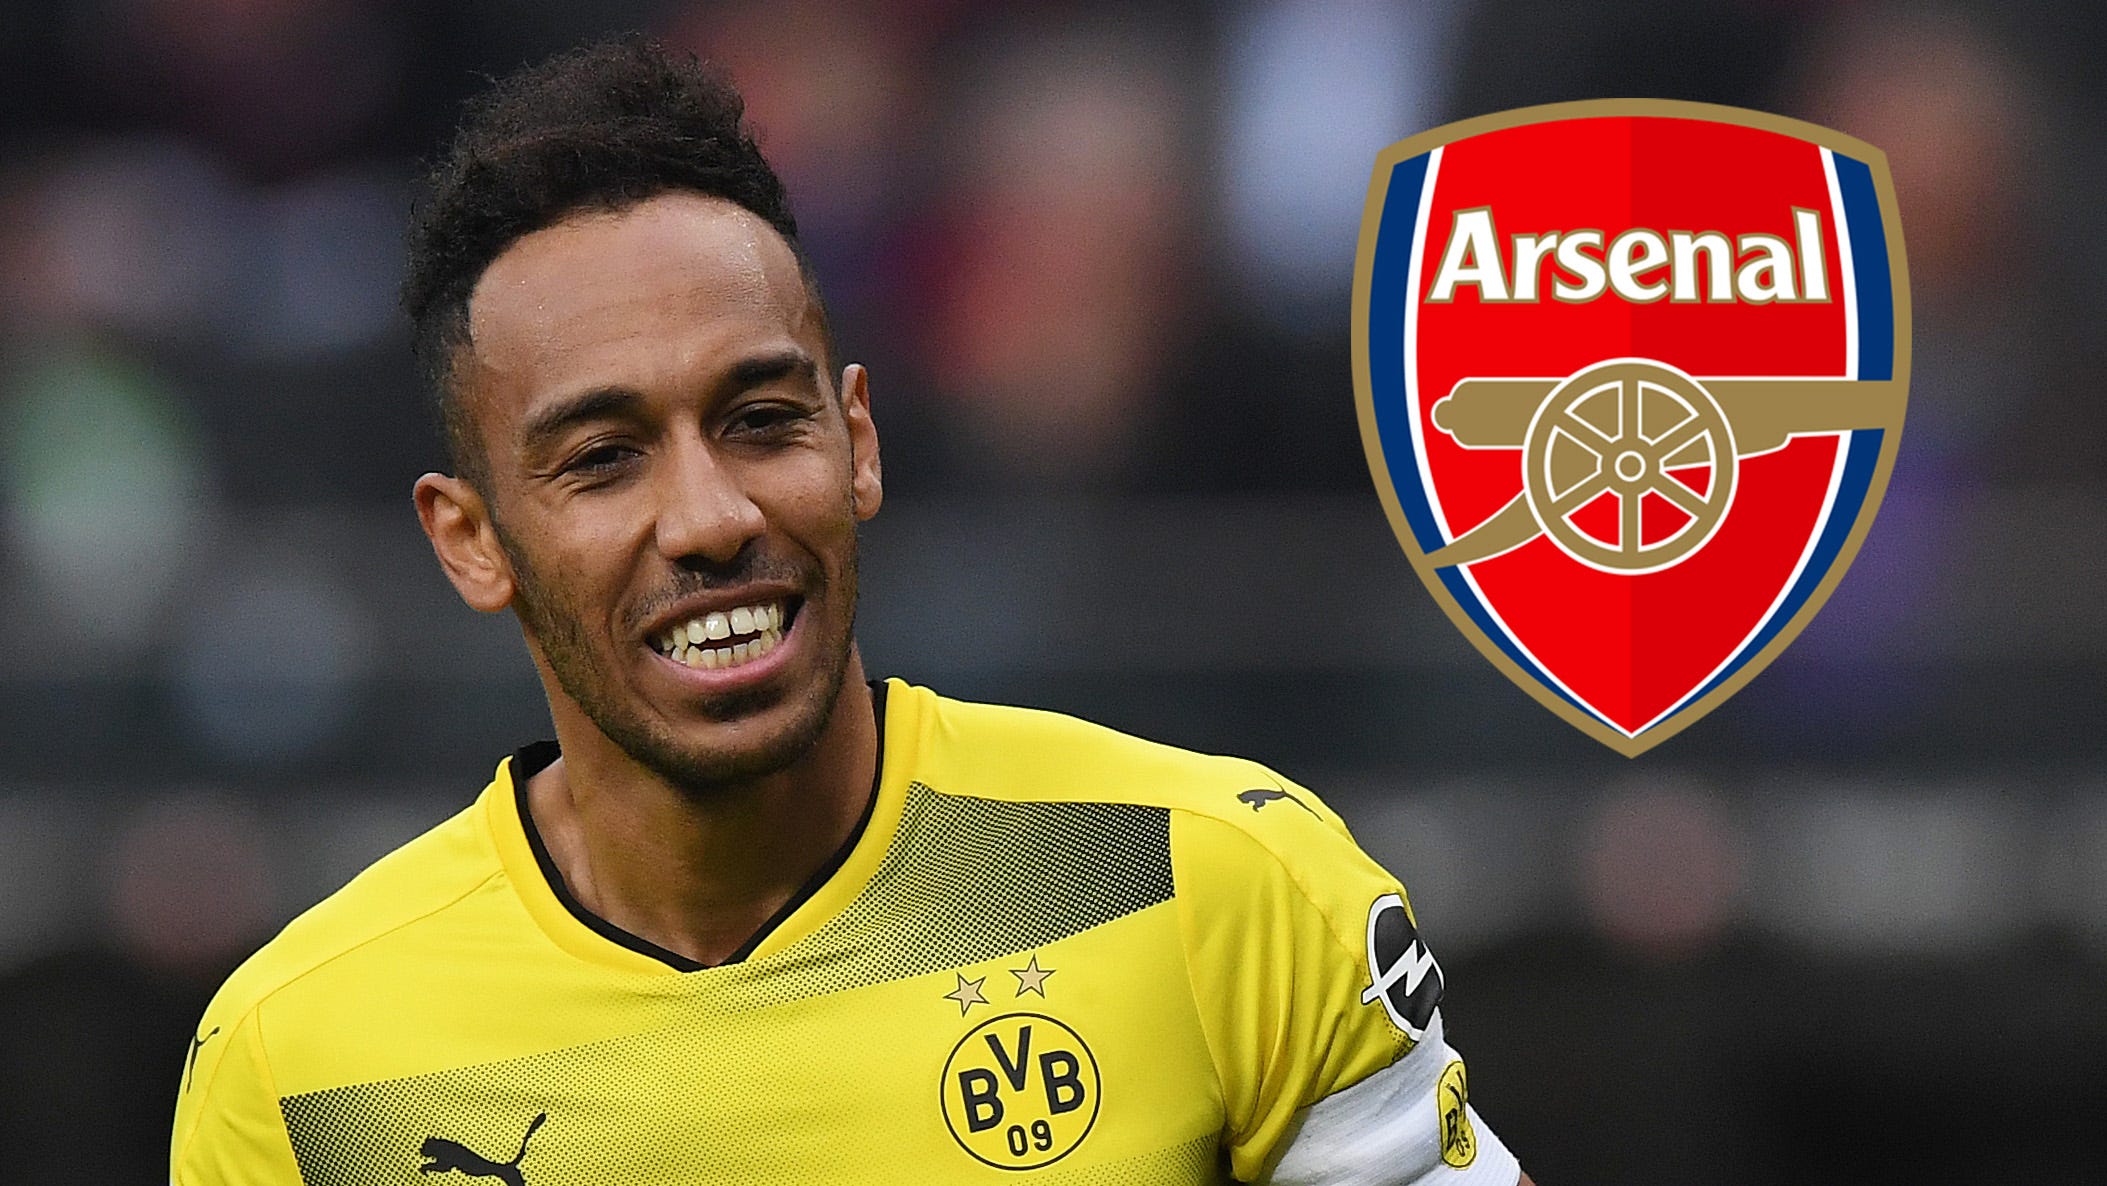 We are in negotiations with Arsenal' - Gunners close in on signing